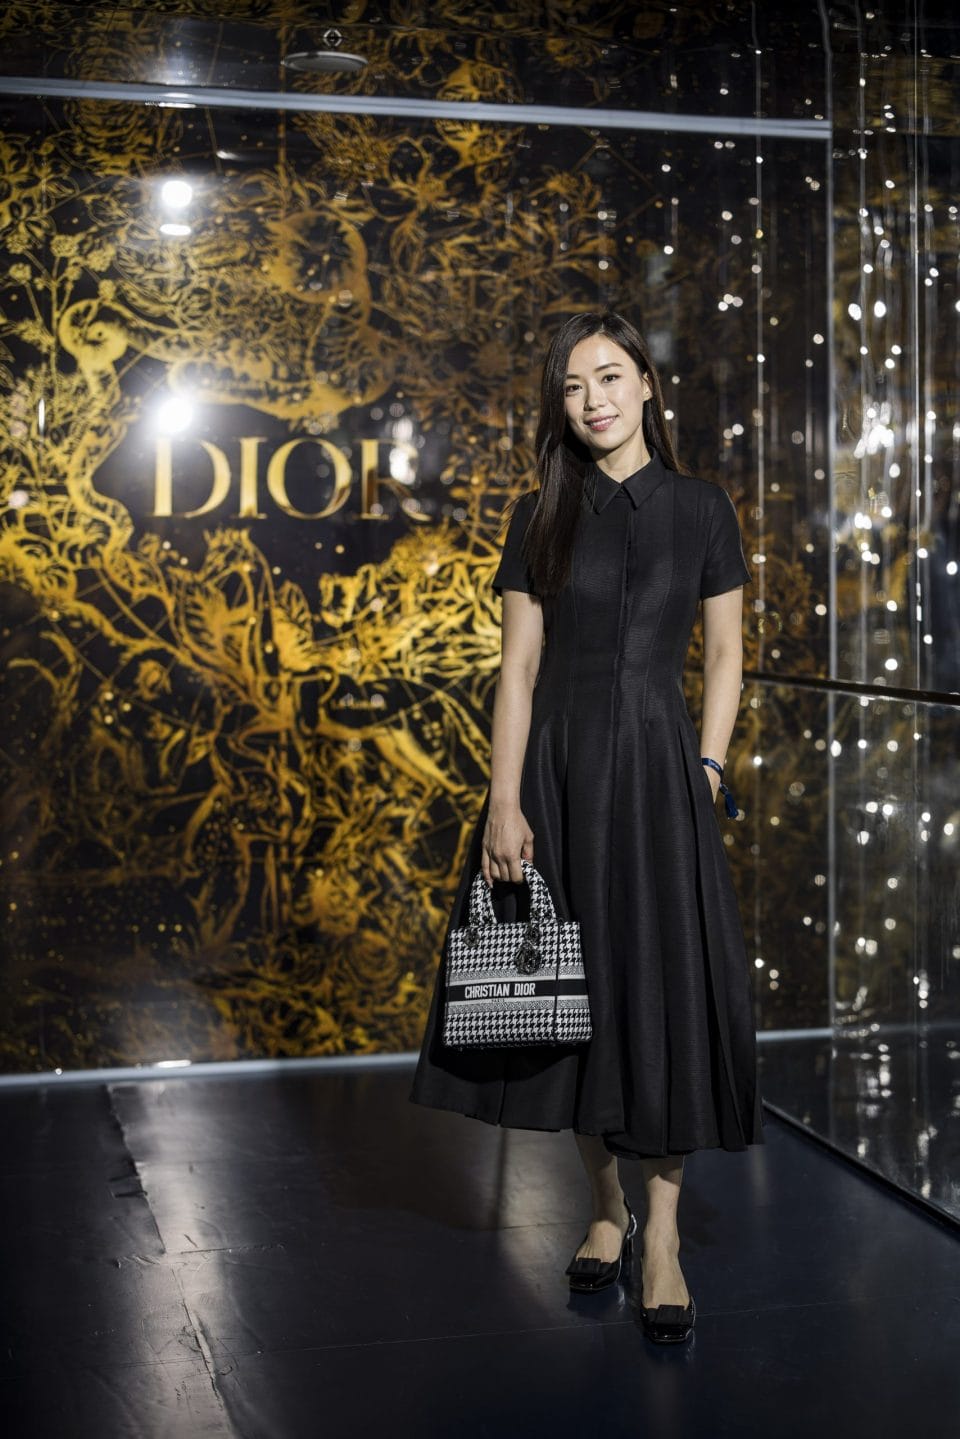 Dior's The Atelier of Dreams Pop-up Was A Star-Studded Affair